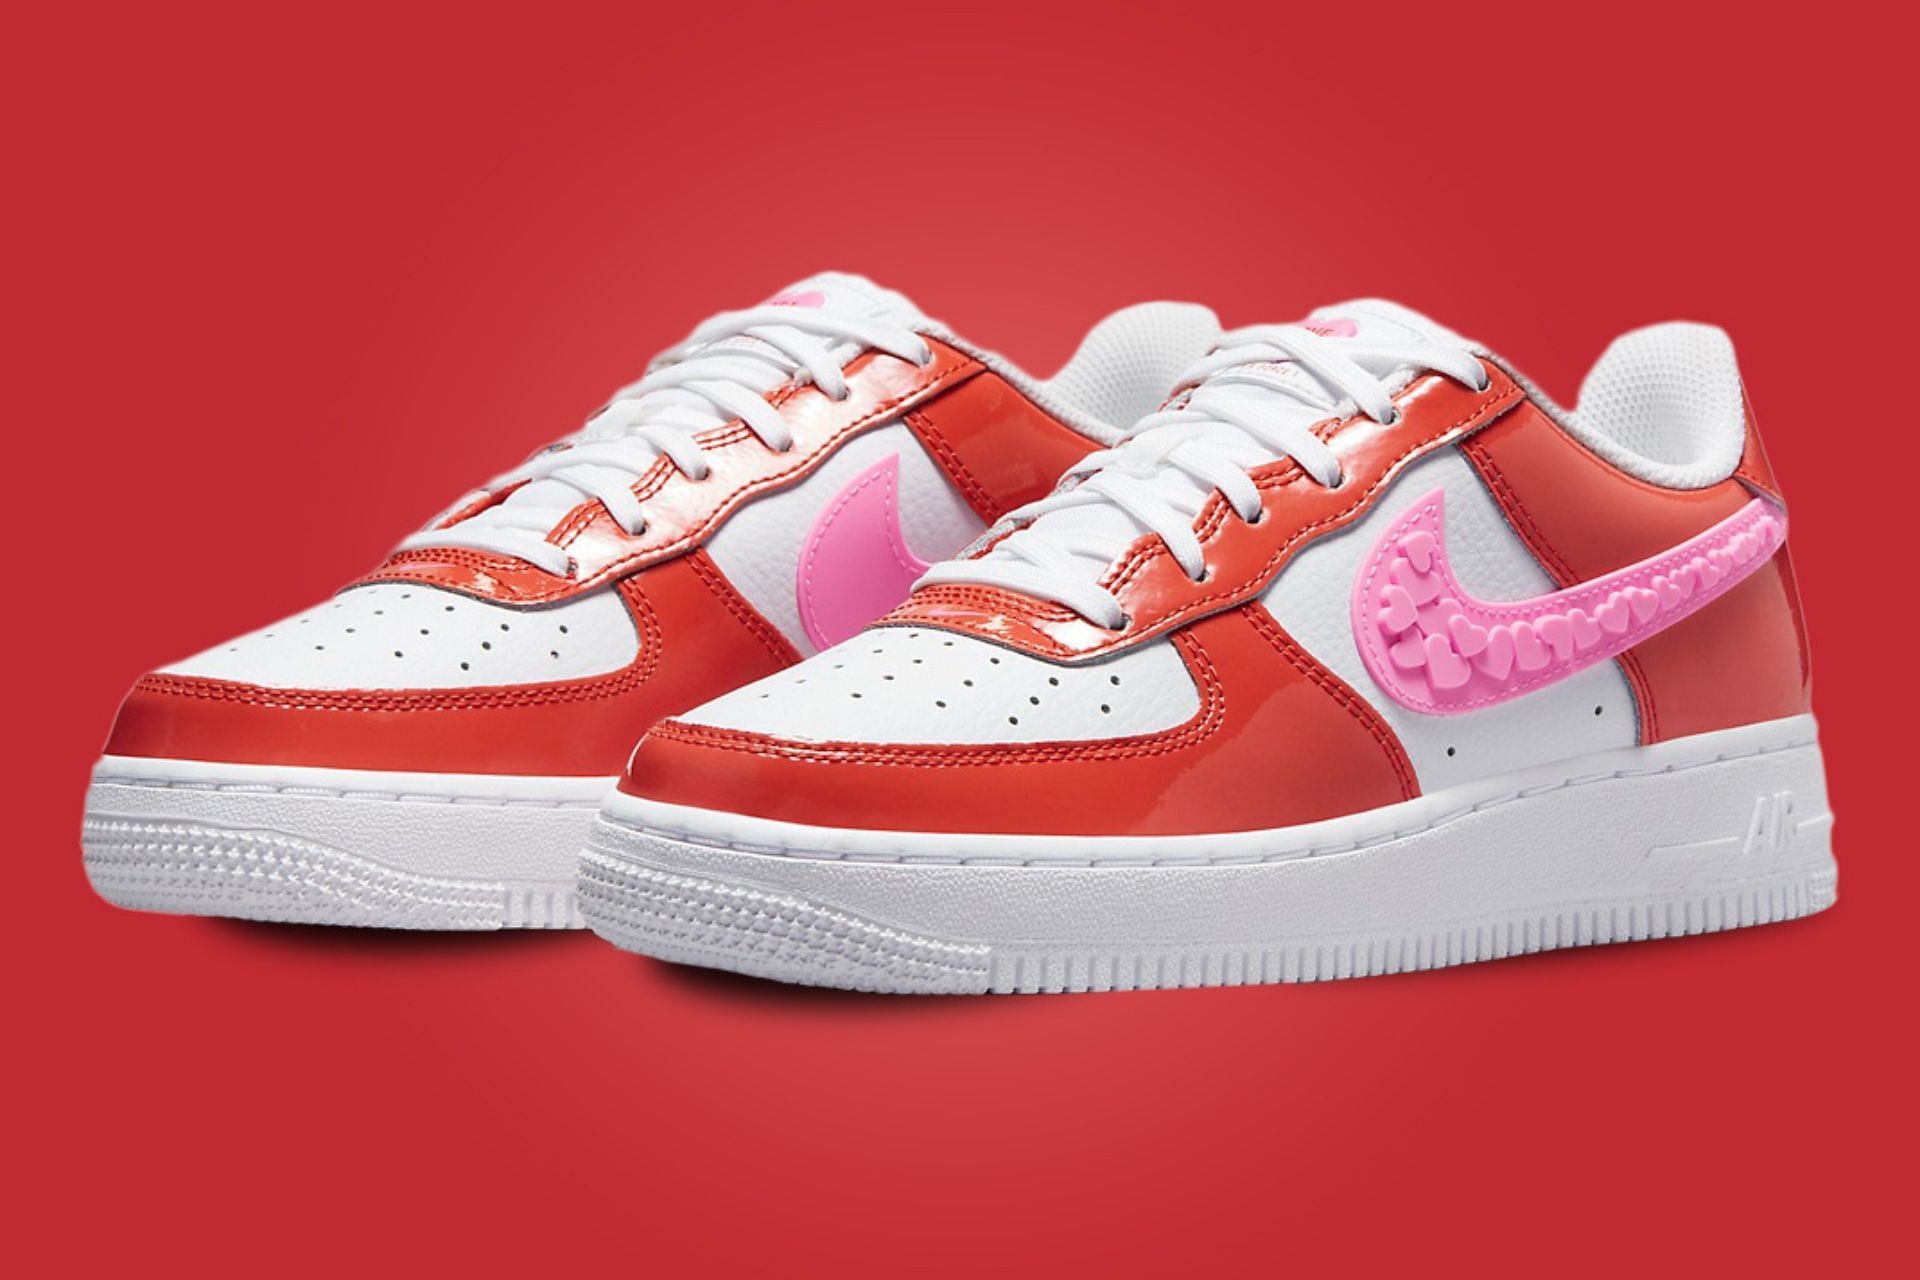 Nike Air Force 1 Low SNKRS Day 2022 Release Details - JustFreshKicks